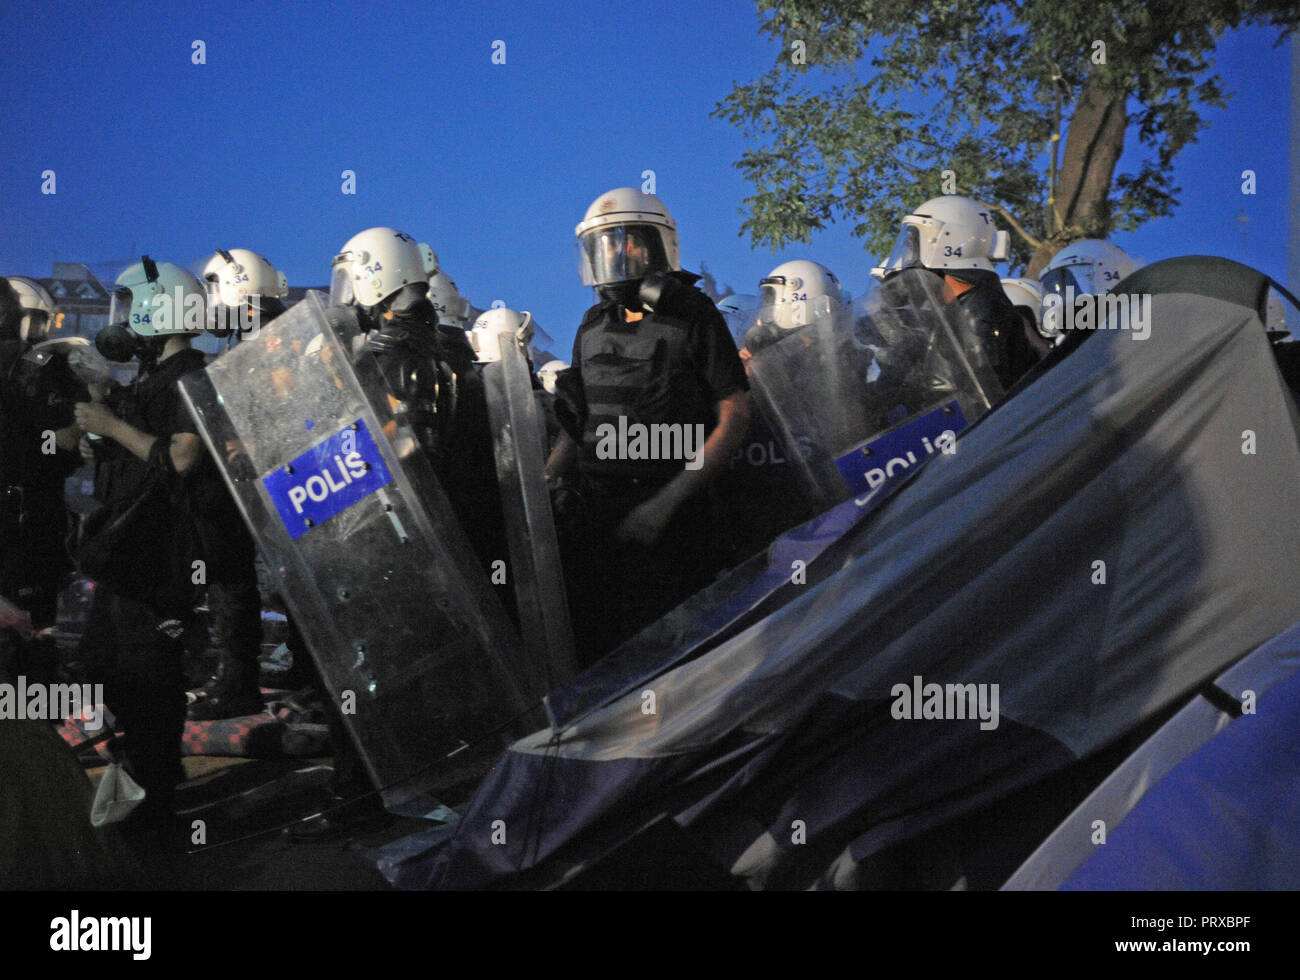 June 15, 2013 - Istanbul, Turkey: Turkish police storm Istanbul's Gezi Park to evict hundreds of anti-government protesters. Les policiers turcs investissent le parc Gezi, evacuant les manifestants opposes a la politique du Premier ministre Recep Tayyip Erdogan. *** FRANCE OUT / NO SALES TO FRENCH MEDIA *** Stock Photo